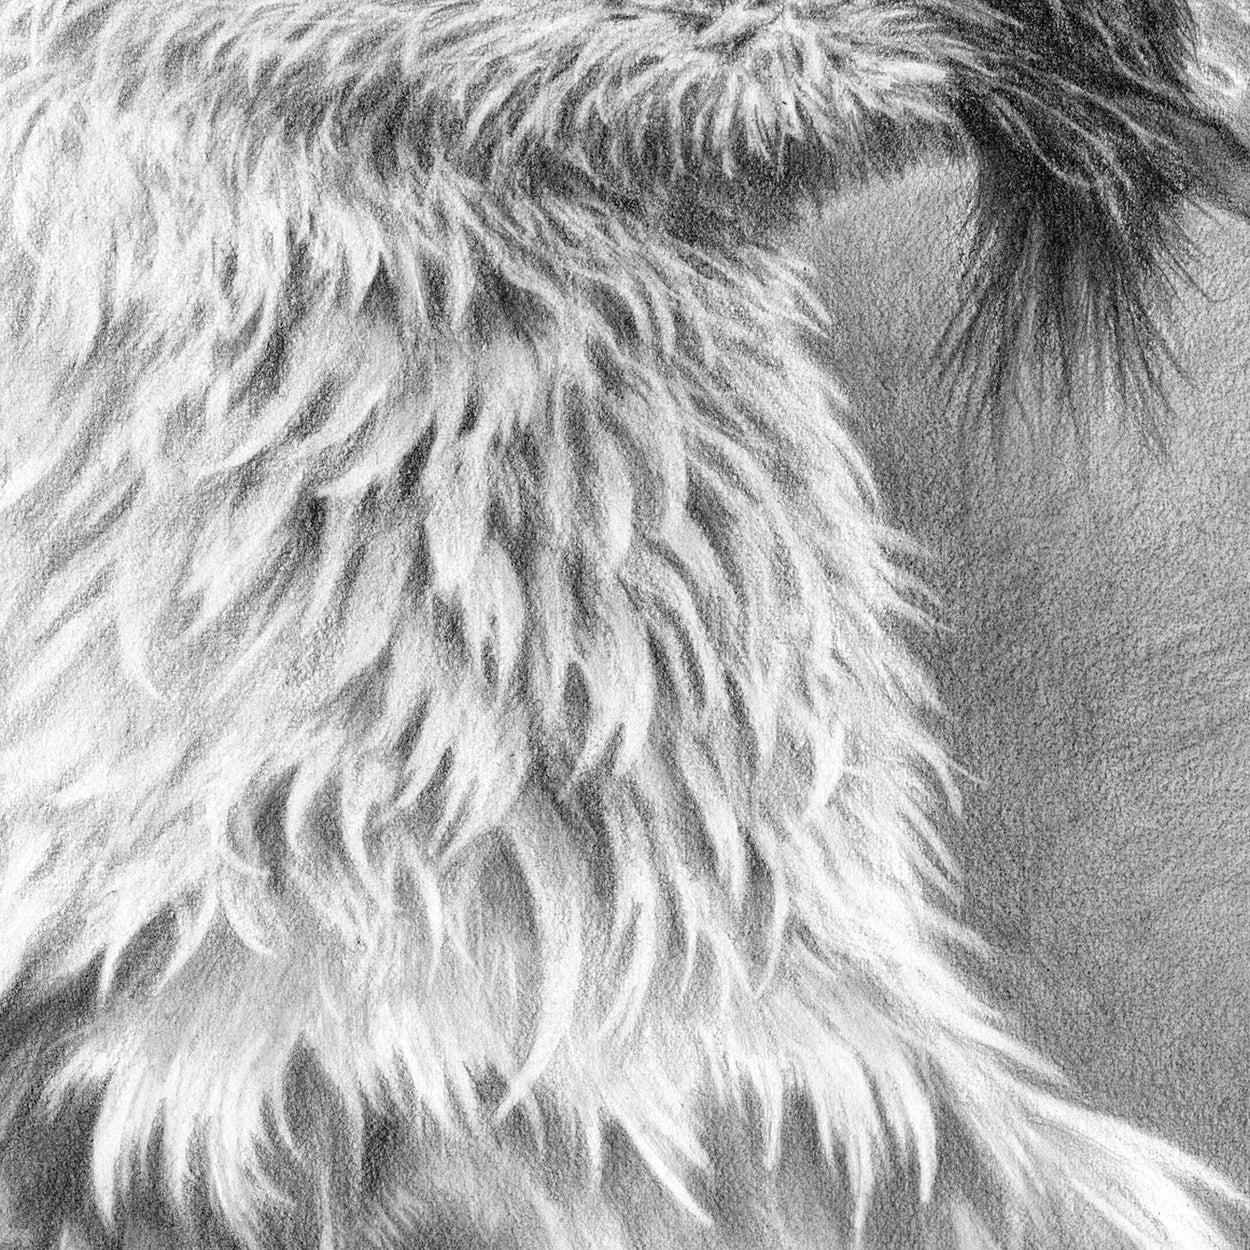 Bearded Vulture Drawing CLose-up 2 - The Thriving Wild - Jill Dimond